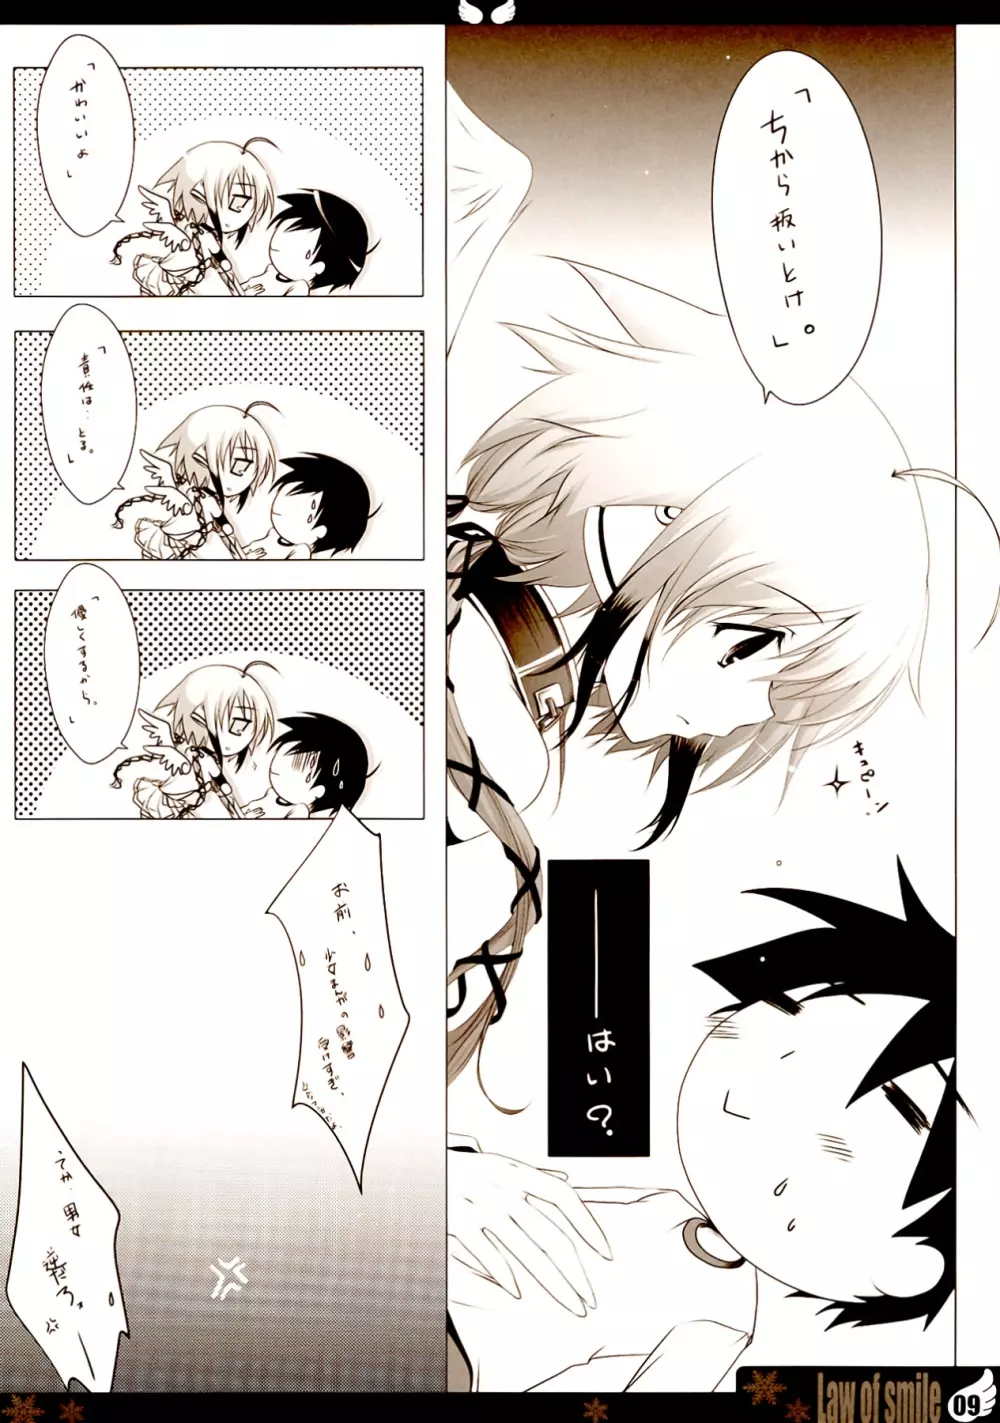 Law of smile Page.9